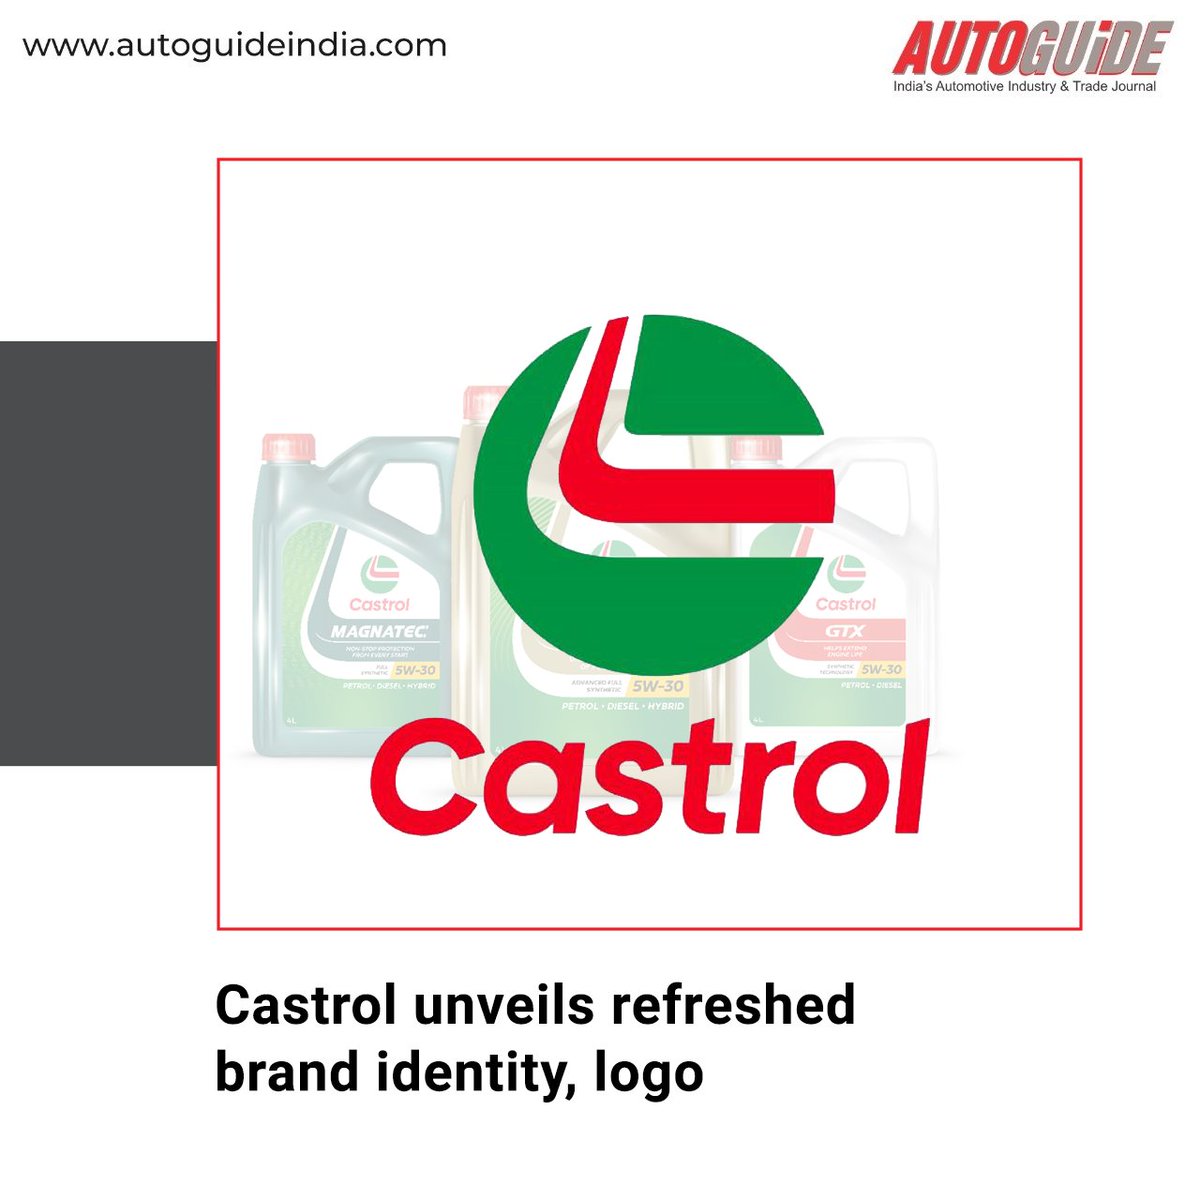 Castrol unveils refreshed brand identity, logo.
Castrol,  part of the BP Group, on 28 February, unveiled its refreshed brand, including an updated look and feel. 
Read the full article: autoguideindia.com/new-launches/c…
#CastrolIndia #lubricants #BPGroup #refreshedbrand #Oilandlubricants